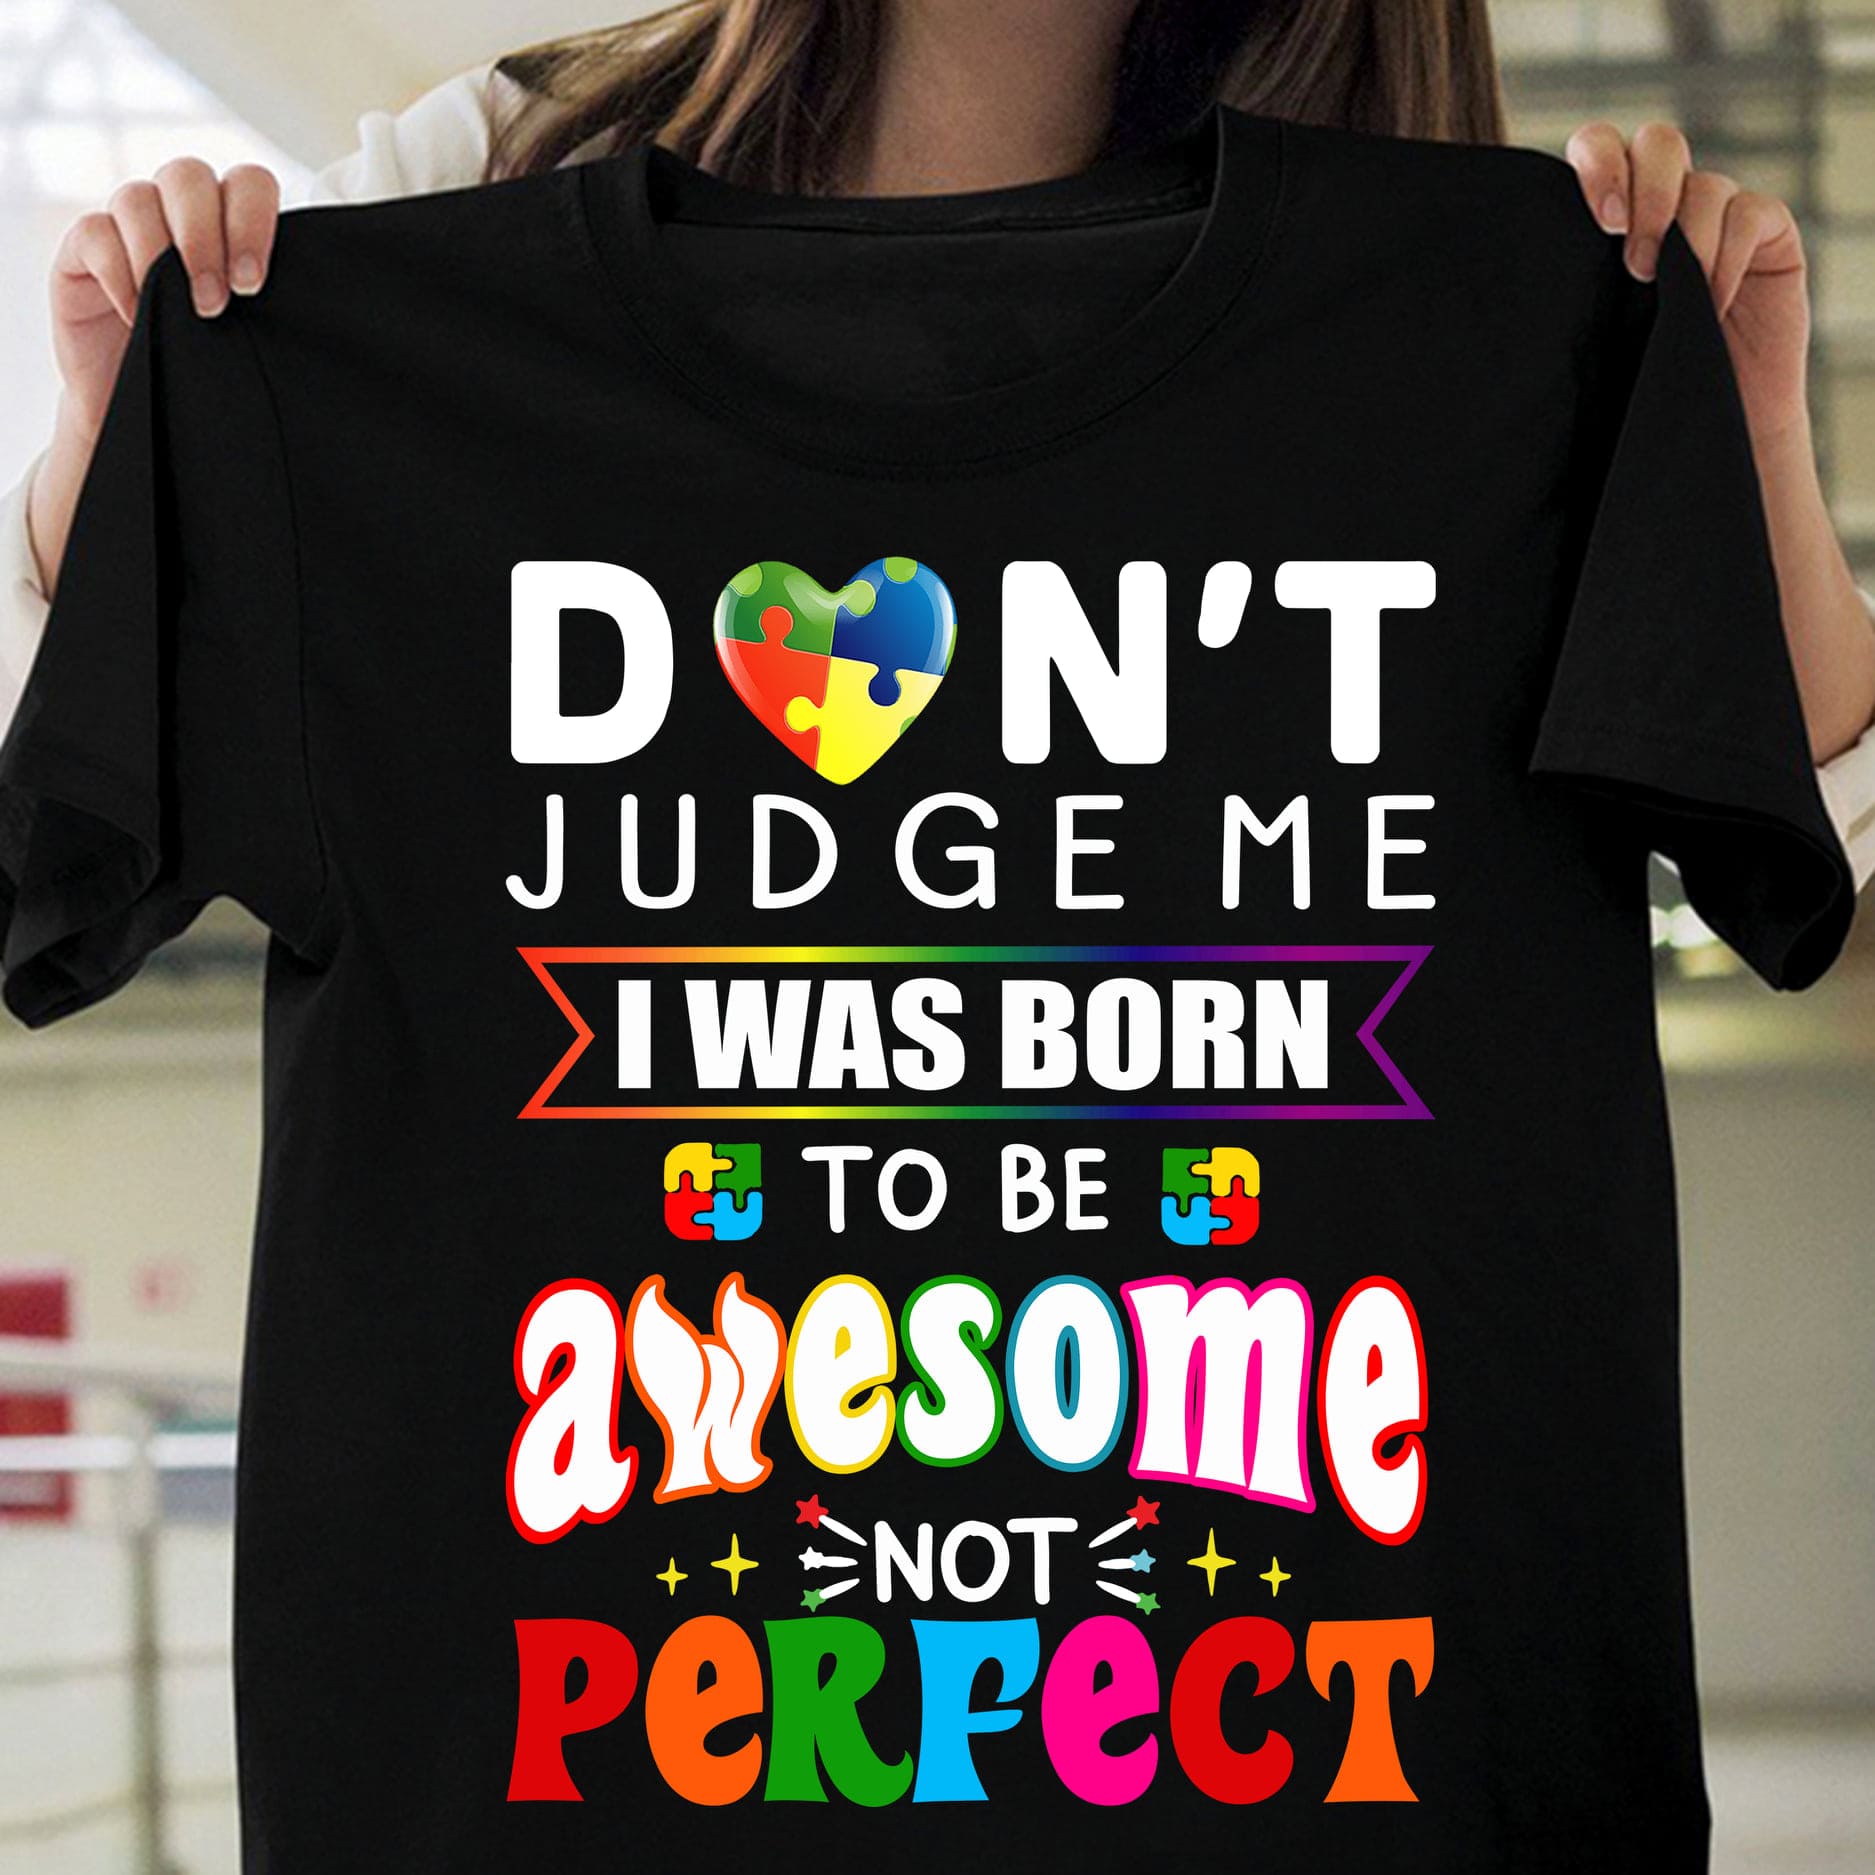 Autism Awareness - Don't judge me i was born to be awesome not perfect